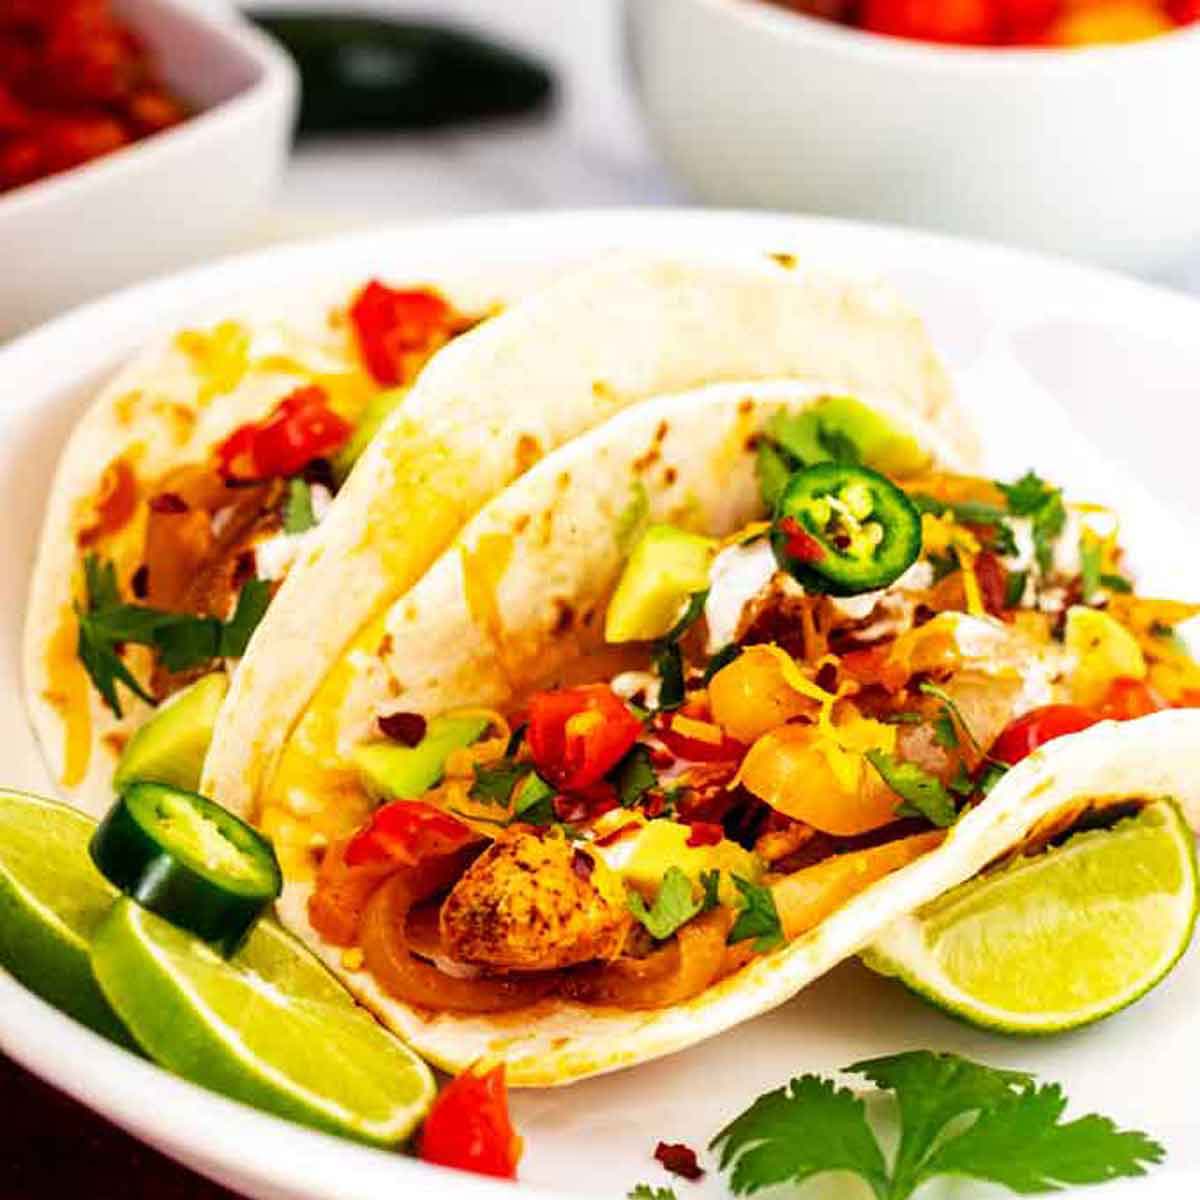 Square photo of two slow cooker chicken fajitas on a white plate garnished with cilantro and jalapeno.